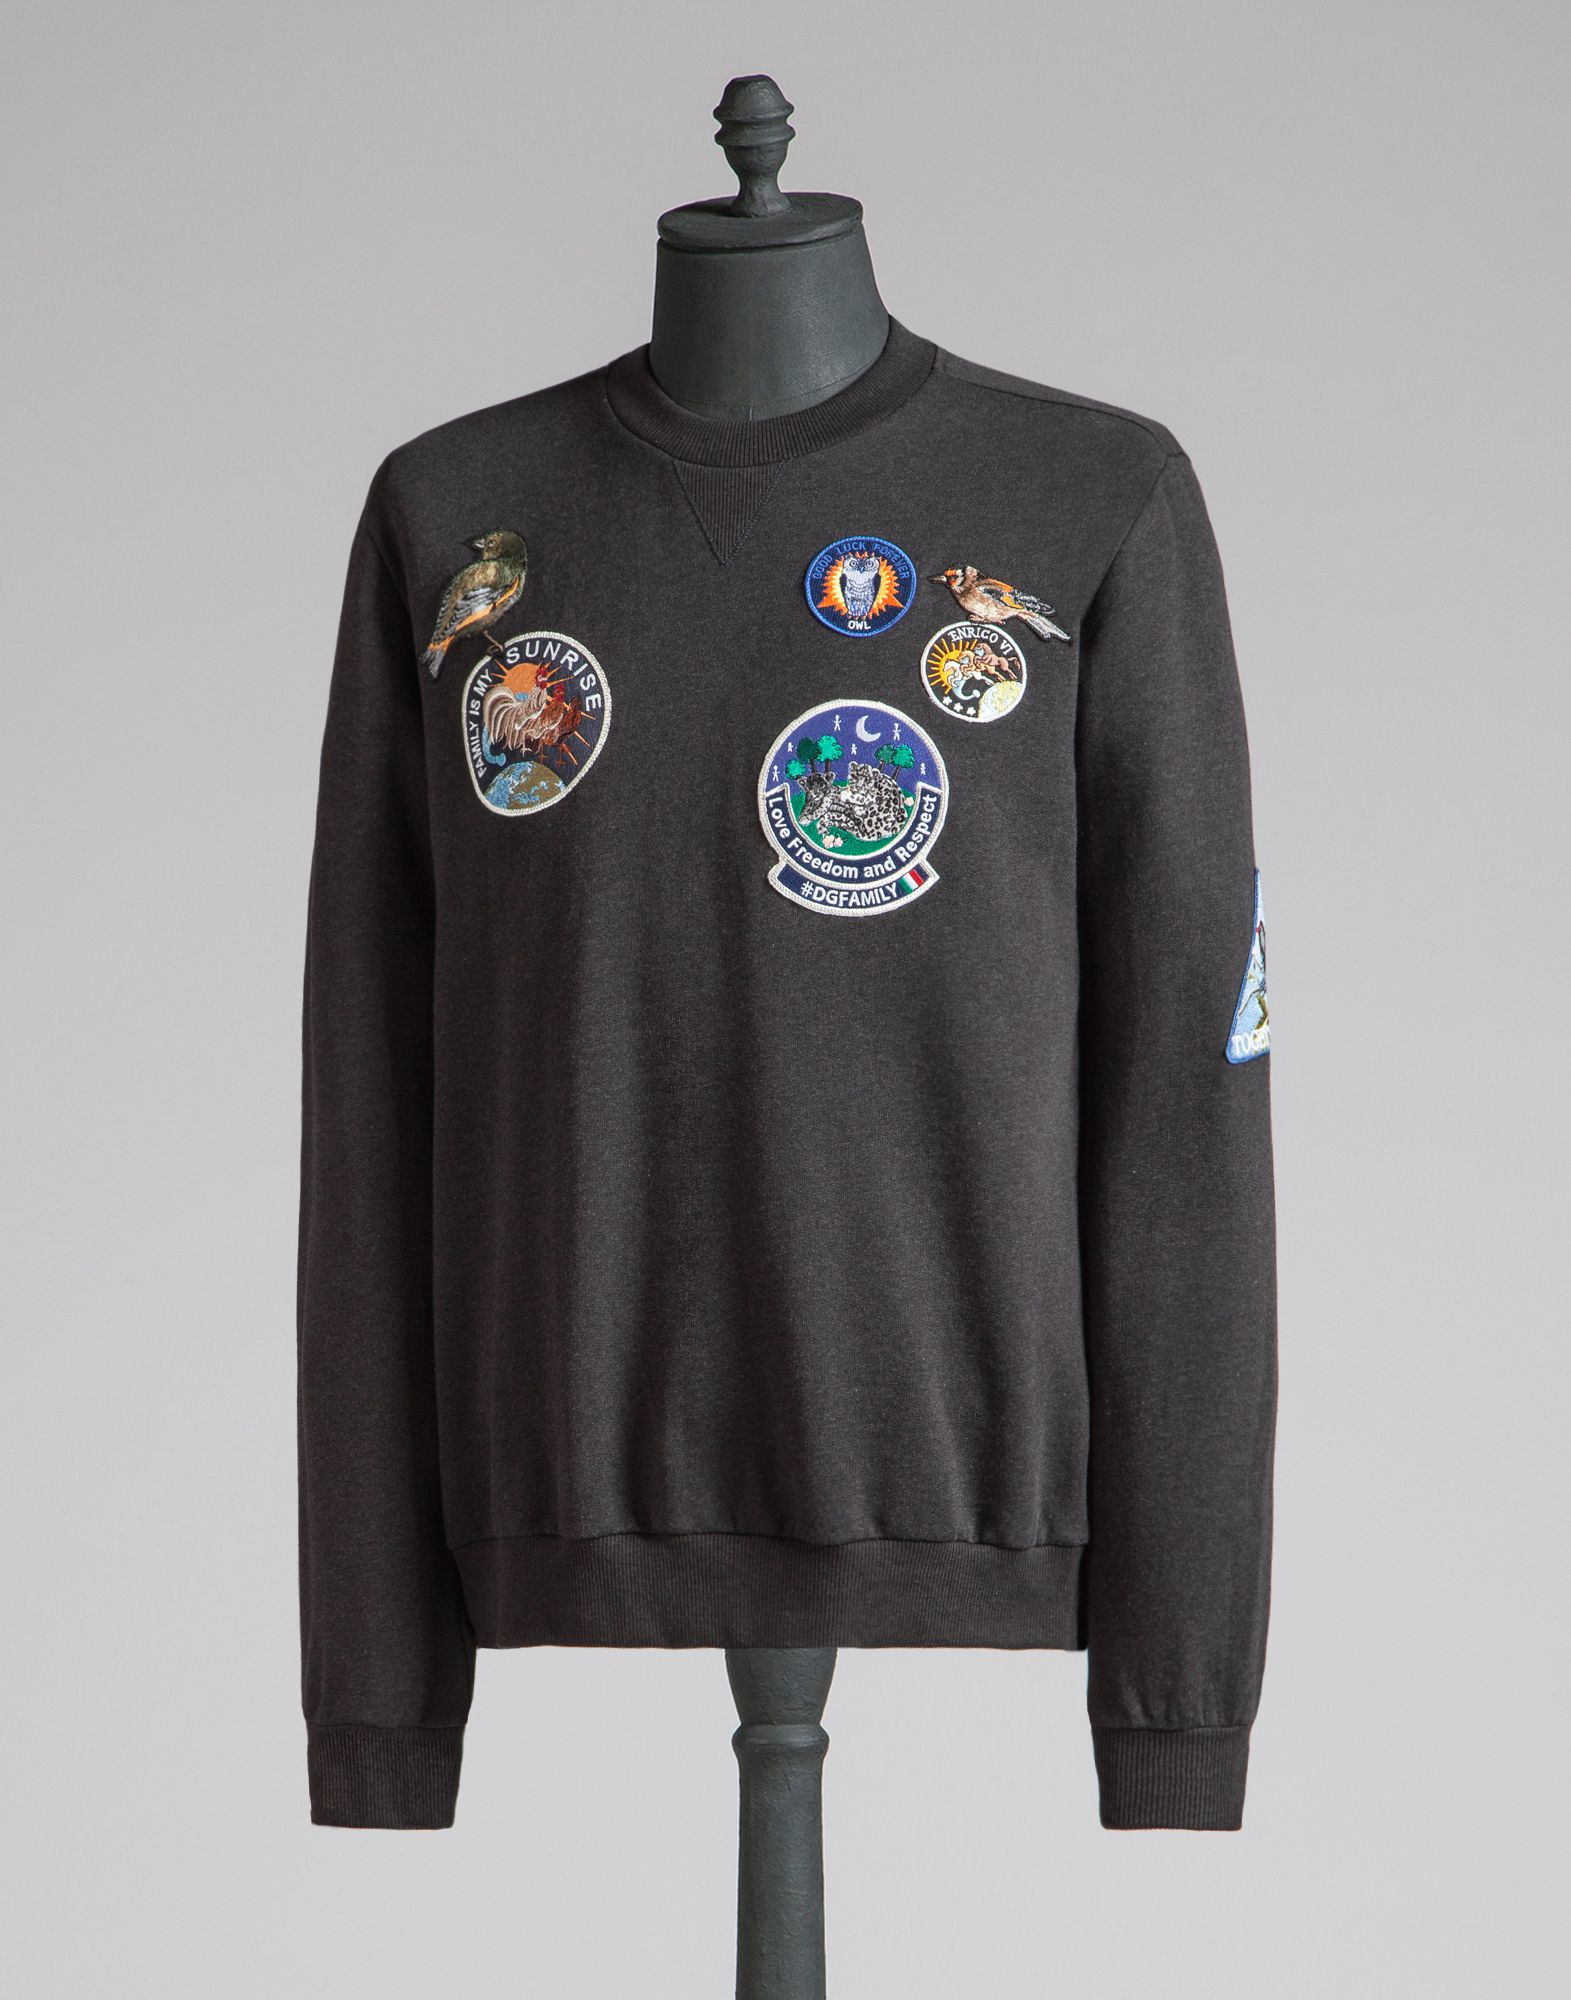 Dolce & Gabbana Cotton Sweatshirt With Embroidered Patches in 